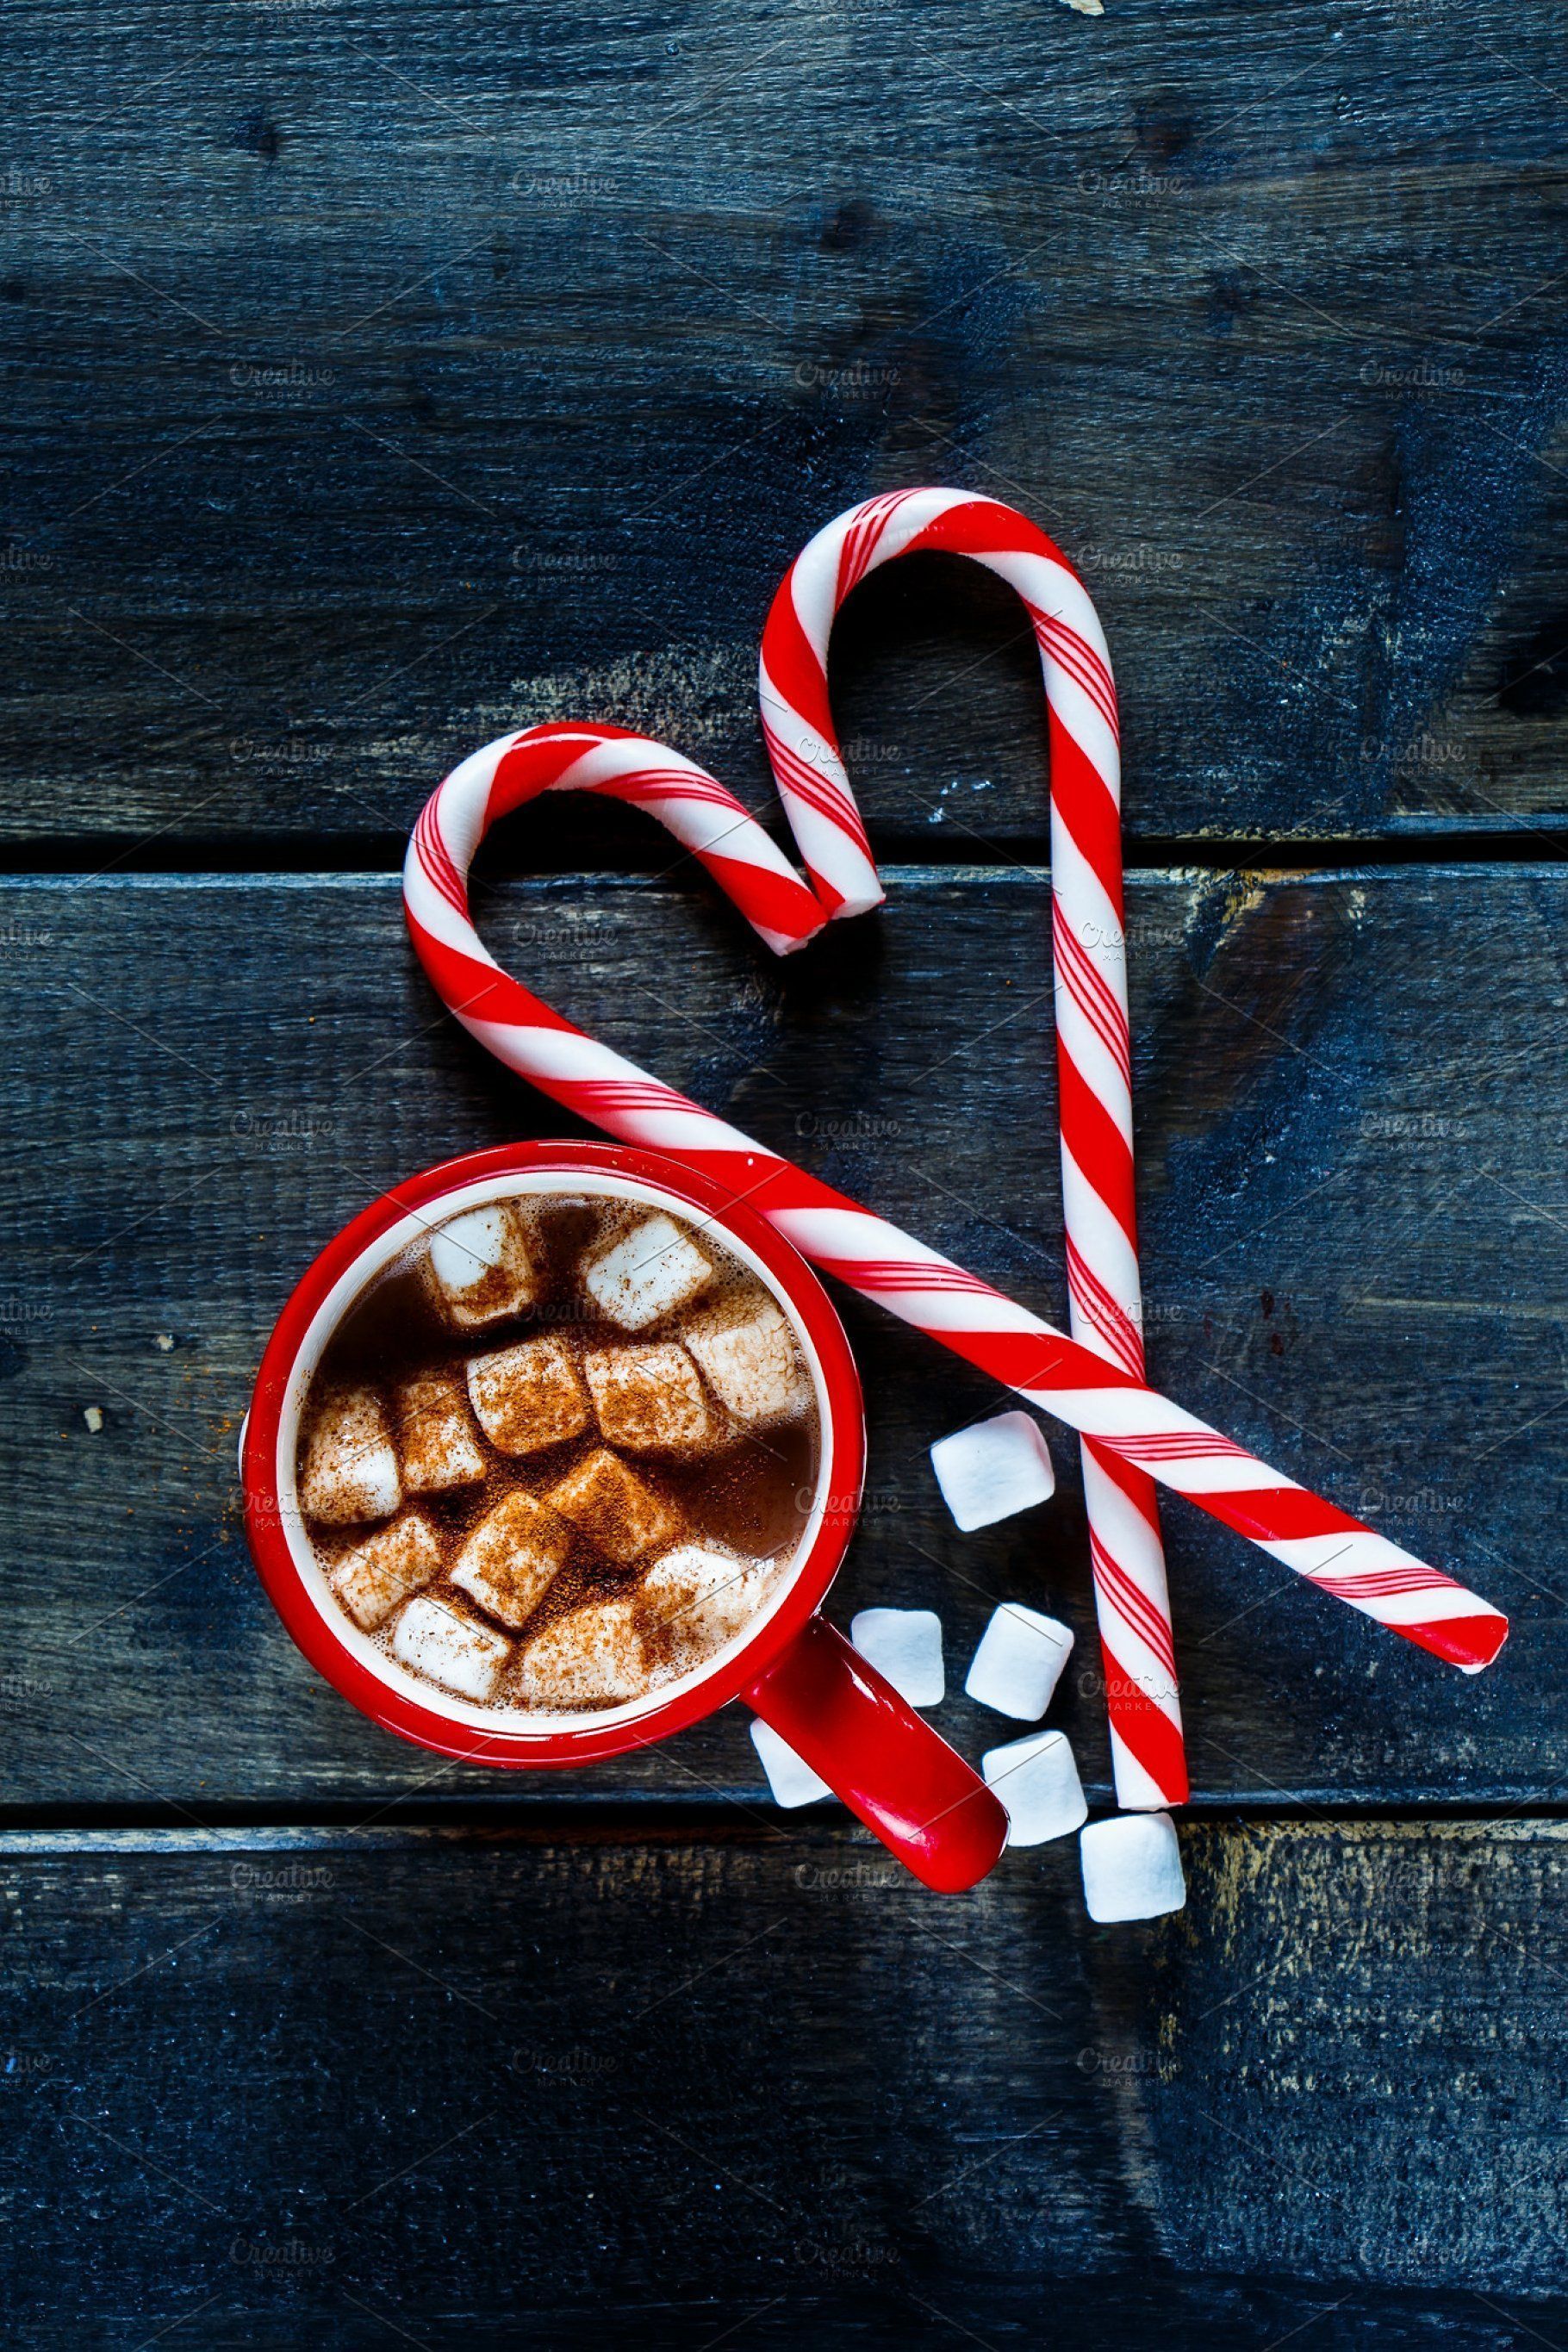 A cup of hot chocolate with candy canes - Candy cane, chocolate, candy, marshmallows